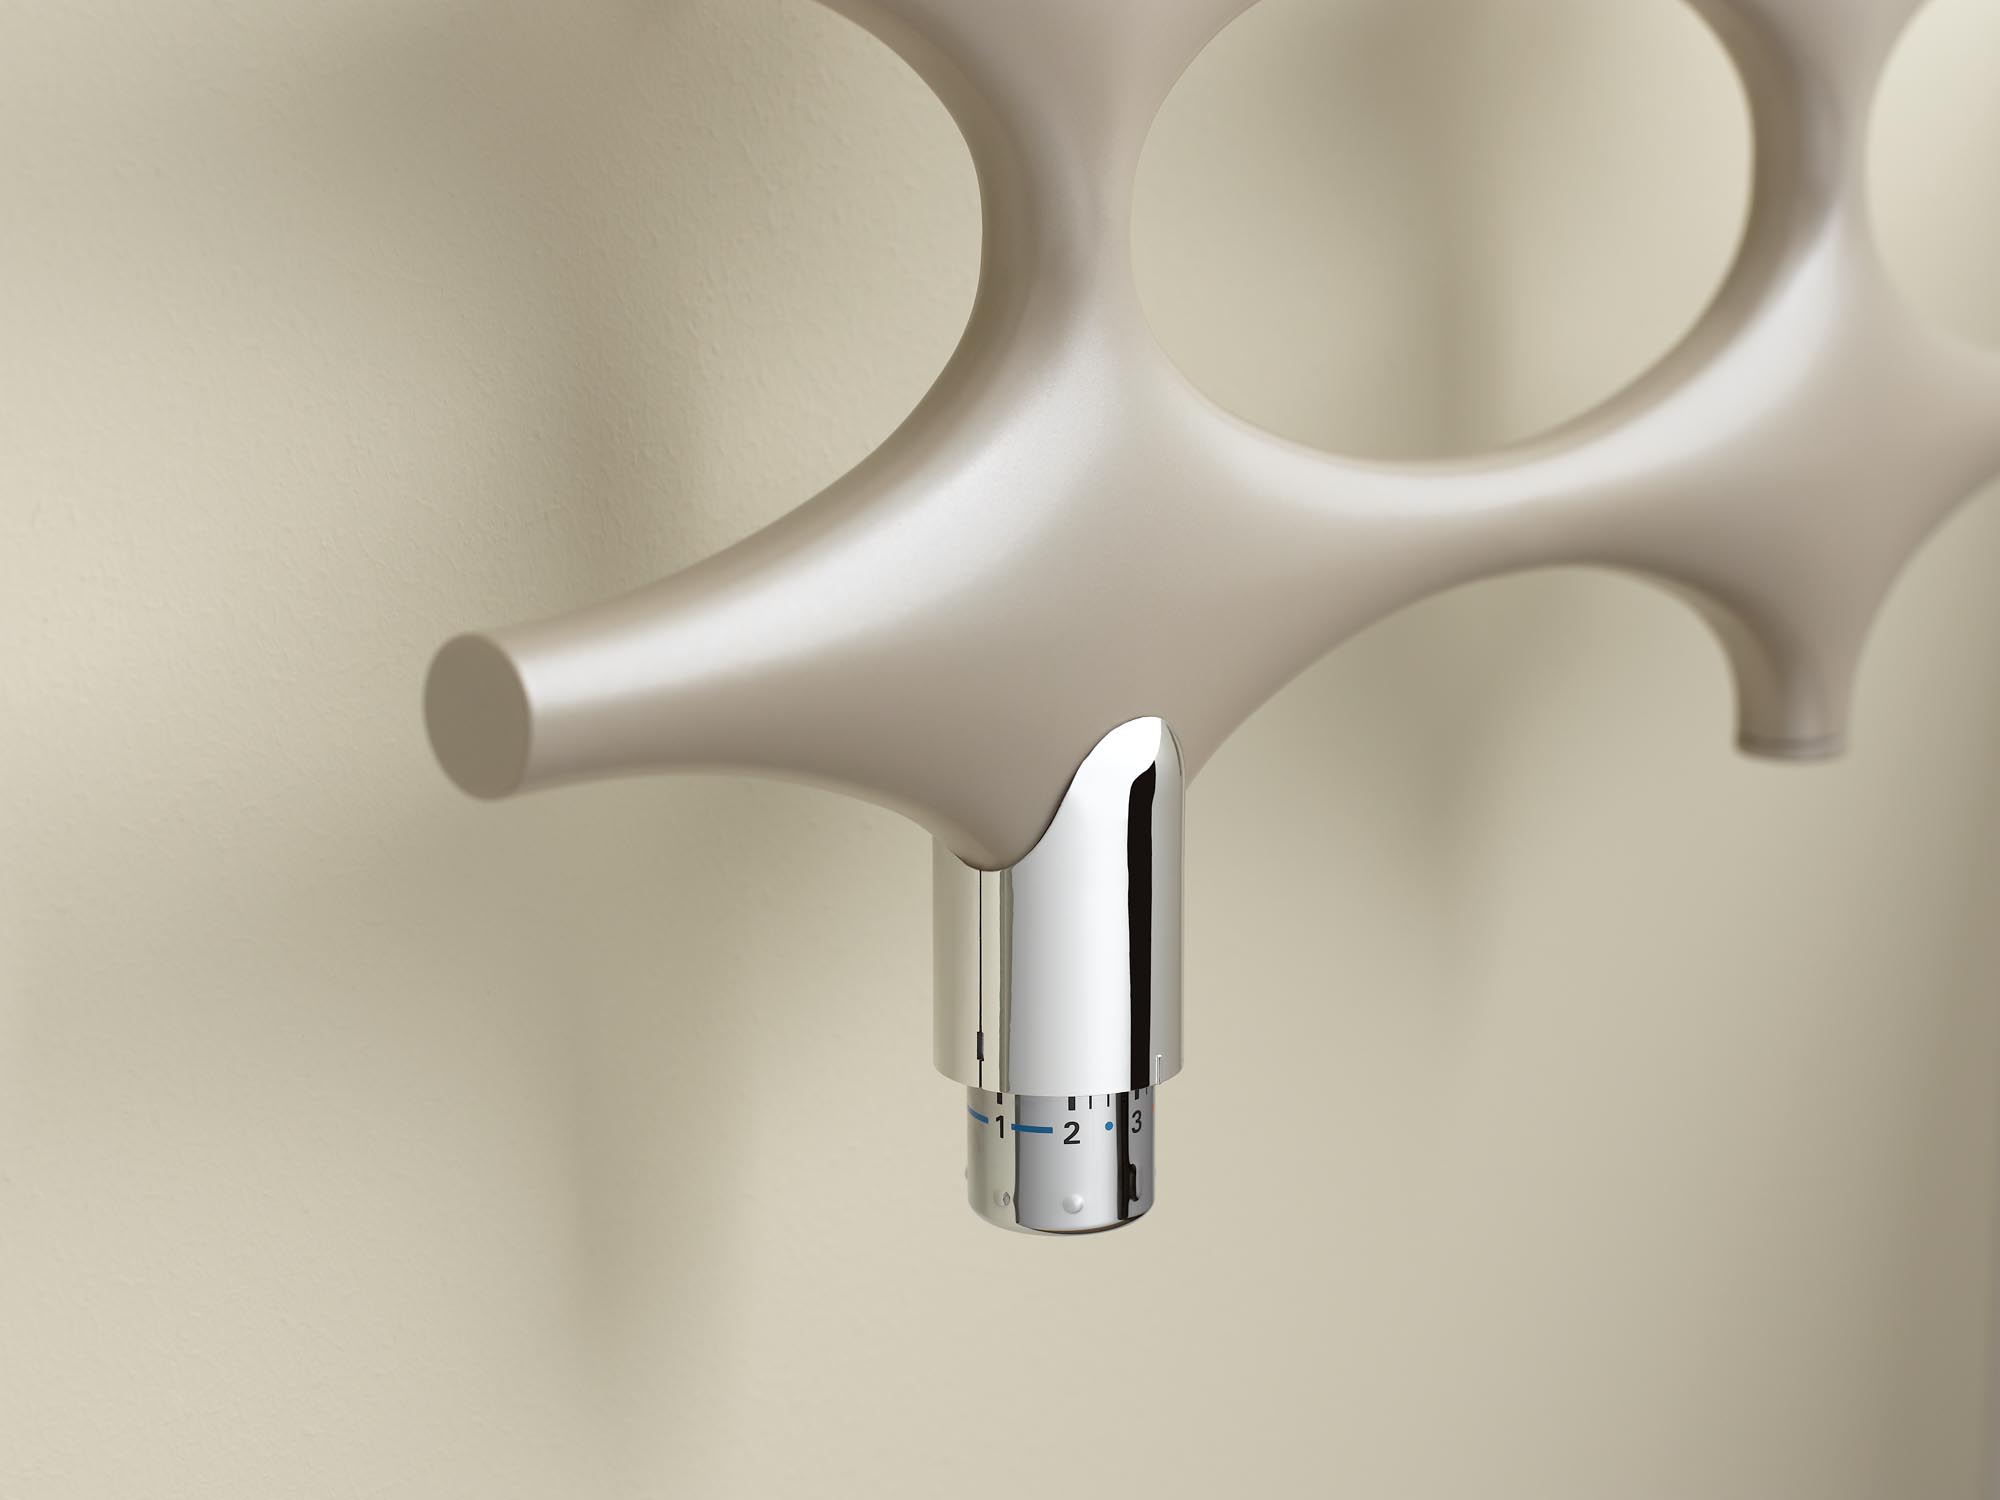 Kermi Ideos-V version with integrated valve fitting.